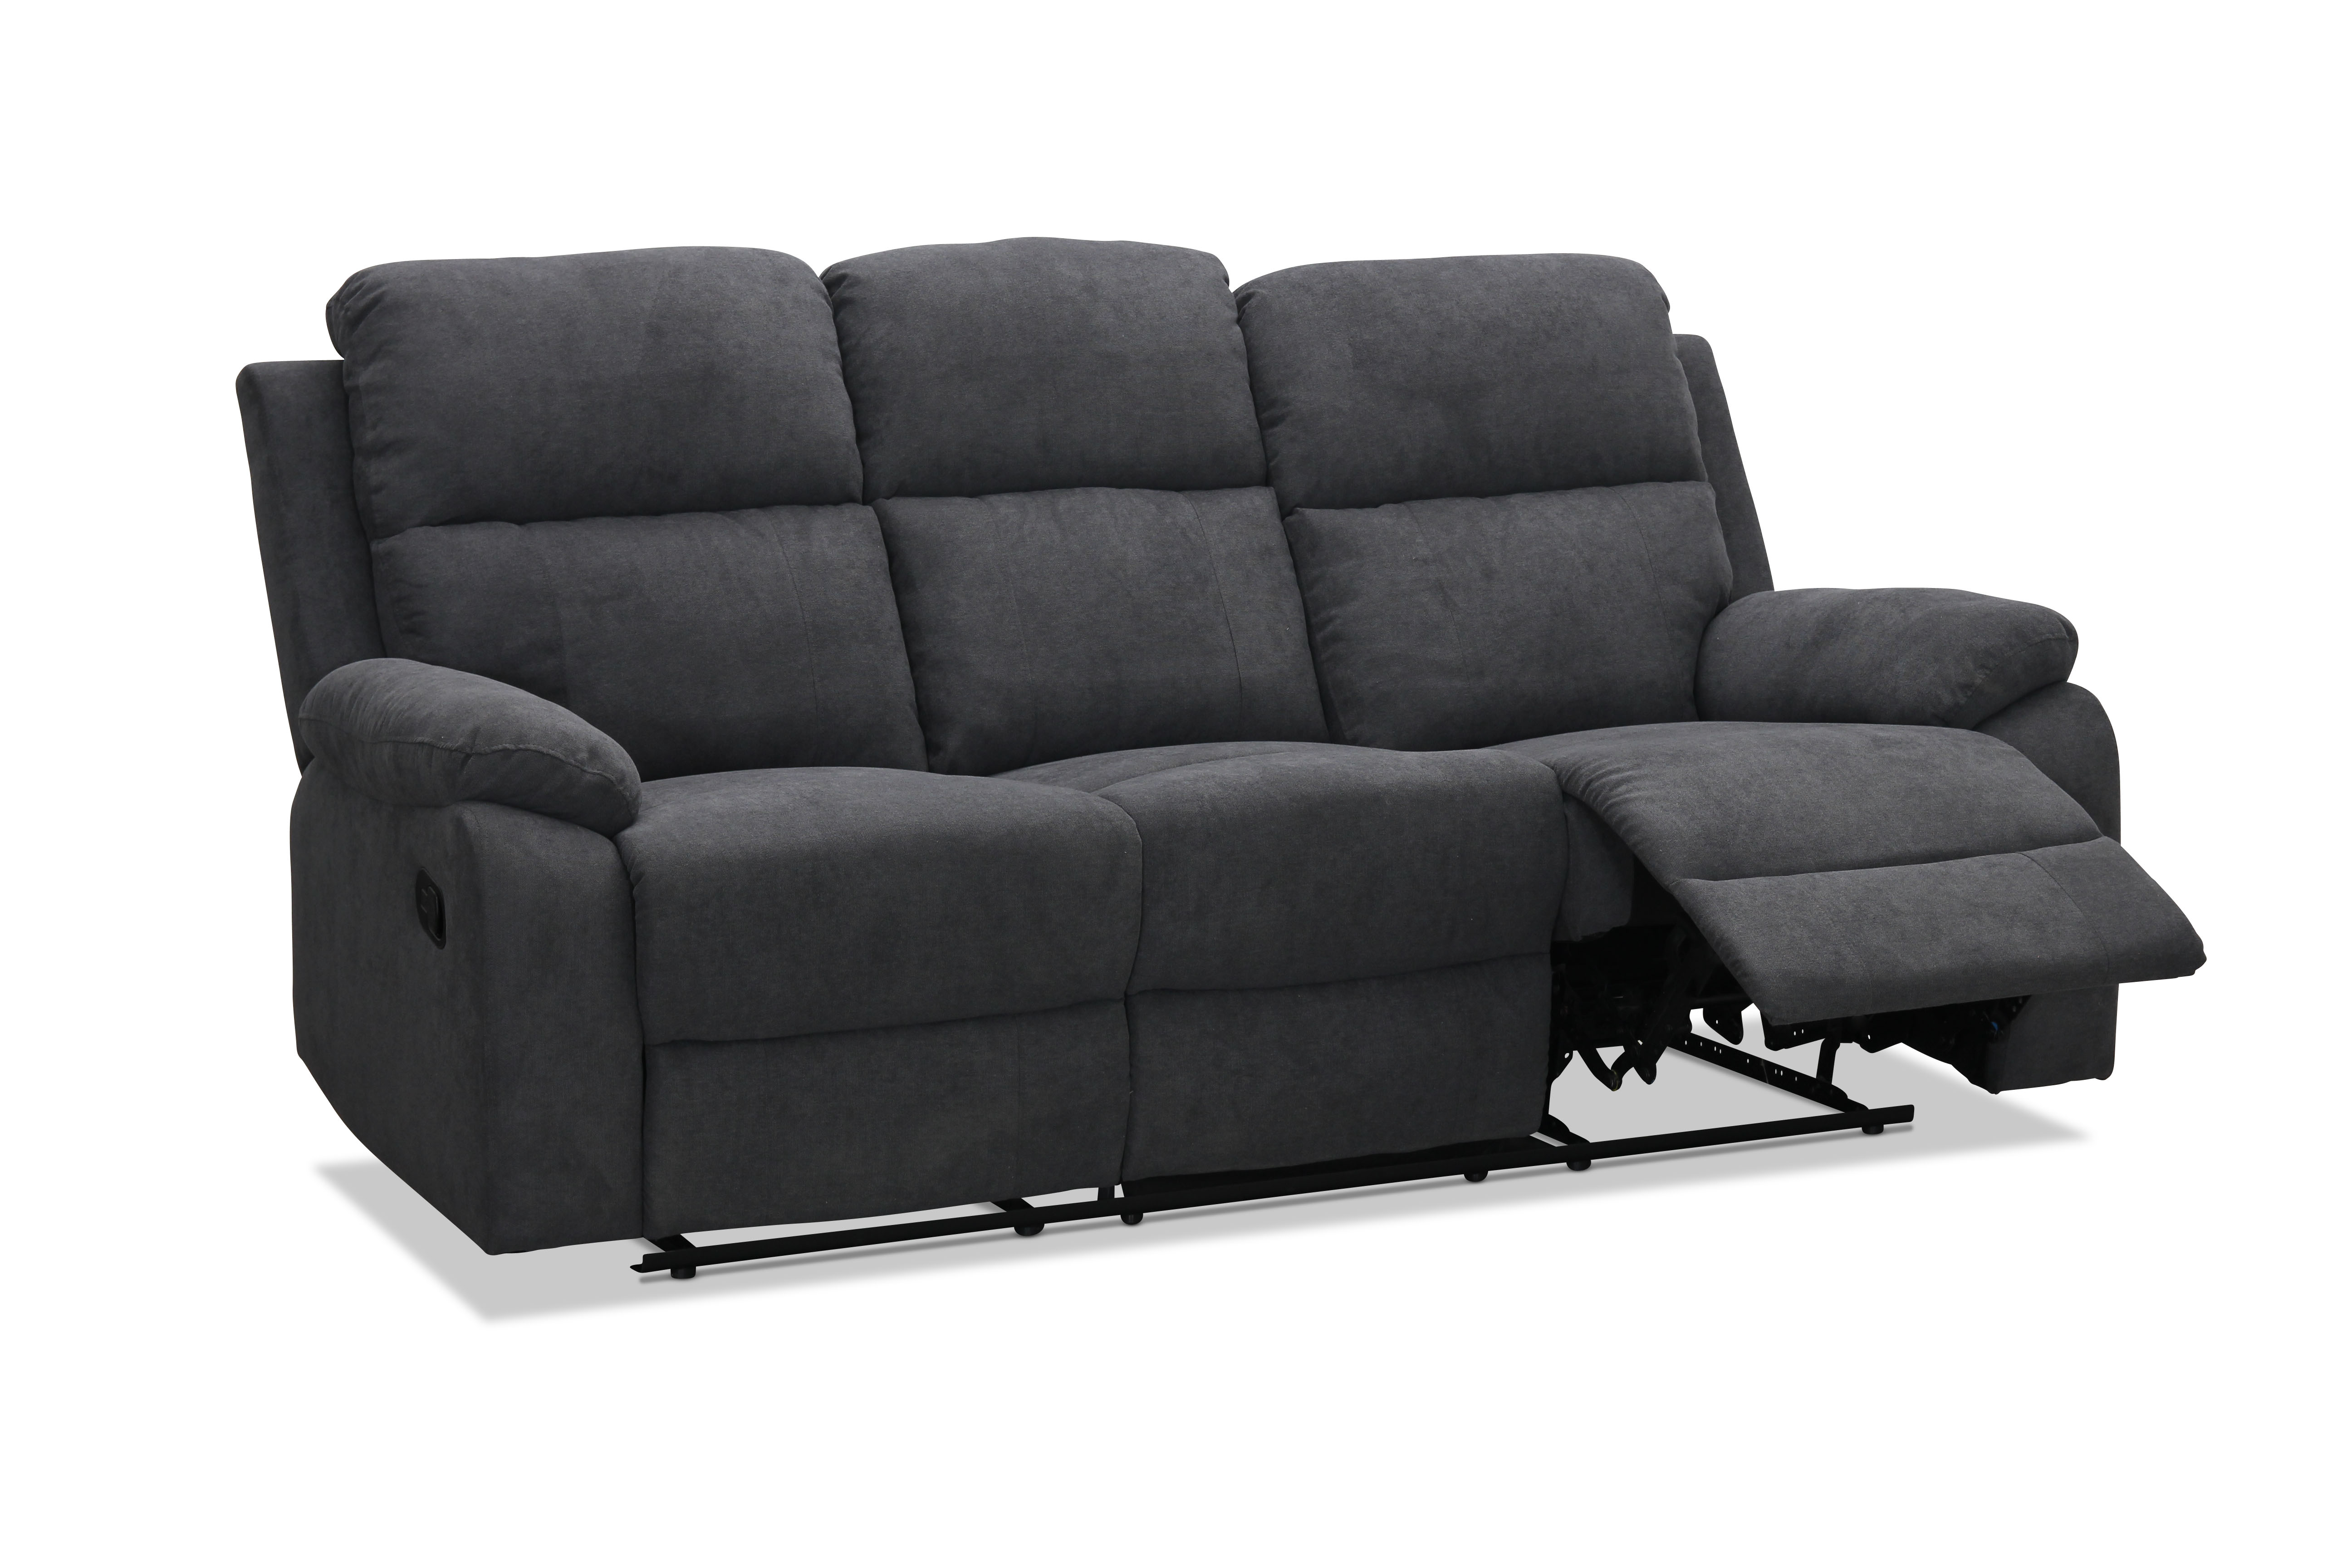 Nevada Recliner 3-sits i gruppen Soffor / Reclinersoffa hos HolyHome (293320010)